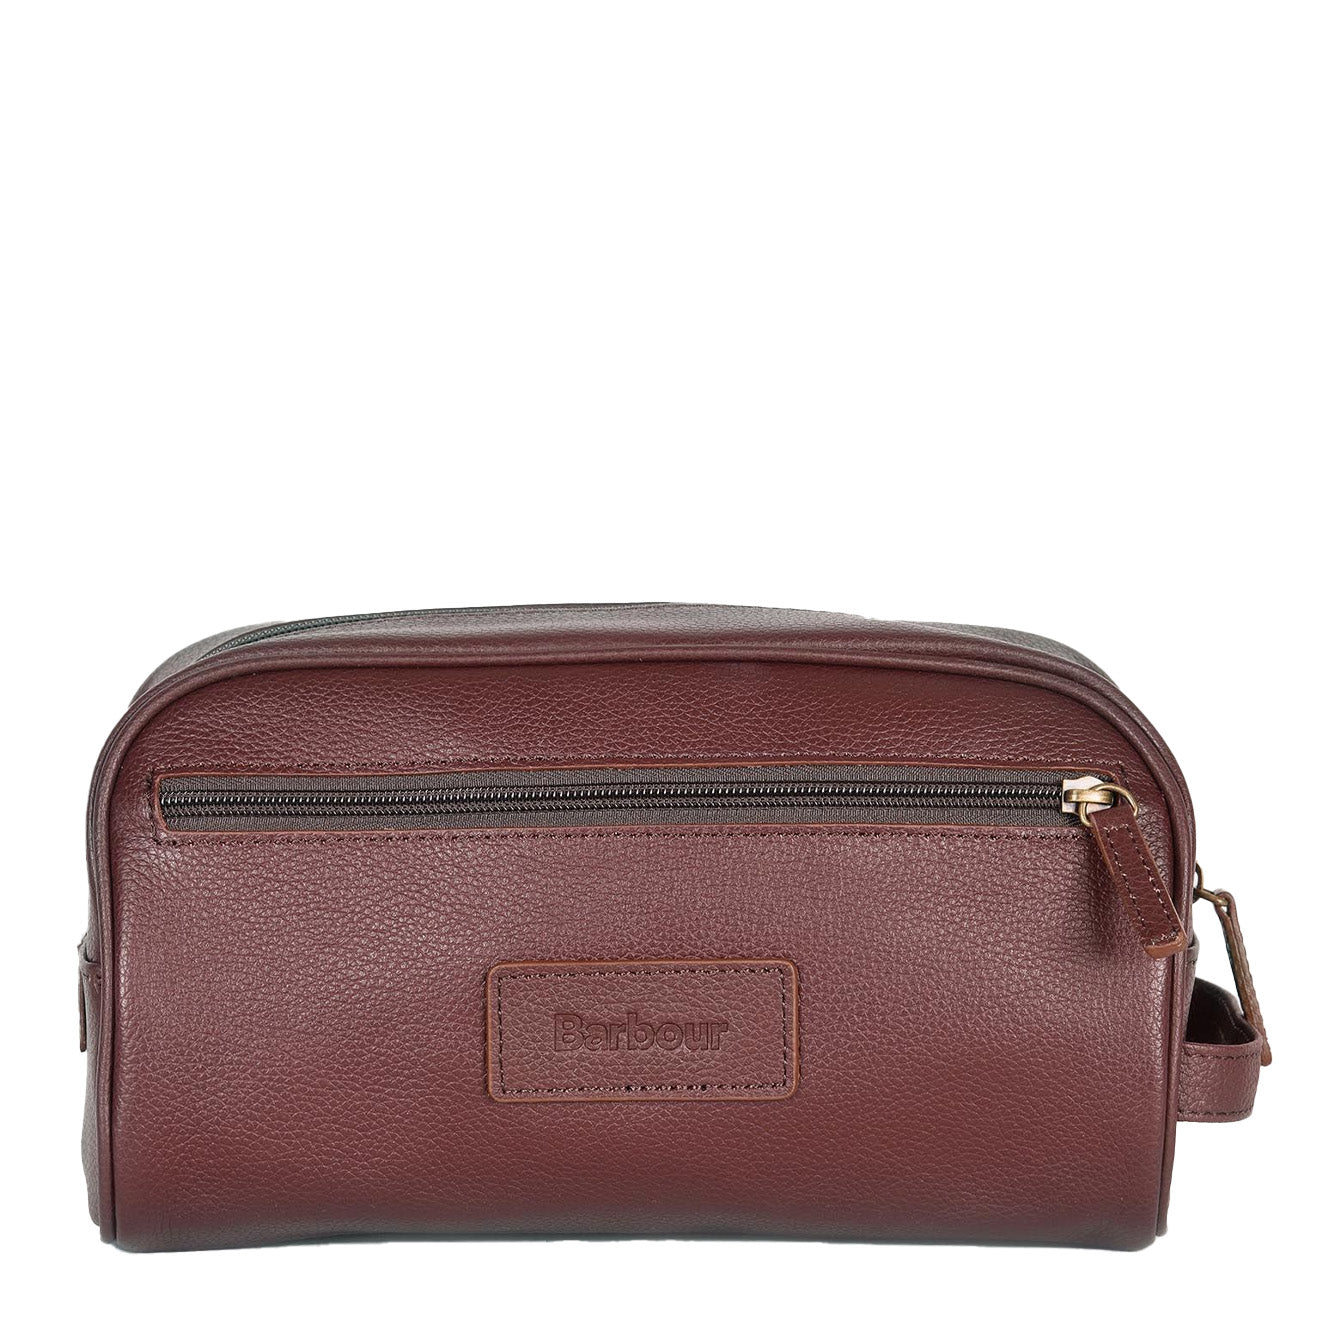 Barbour Leather Wash Bag Dark Brown | The Sporting Lodge